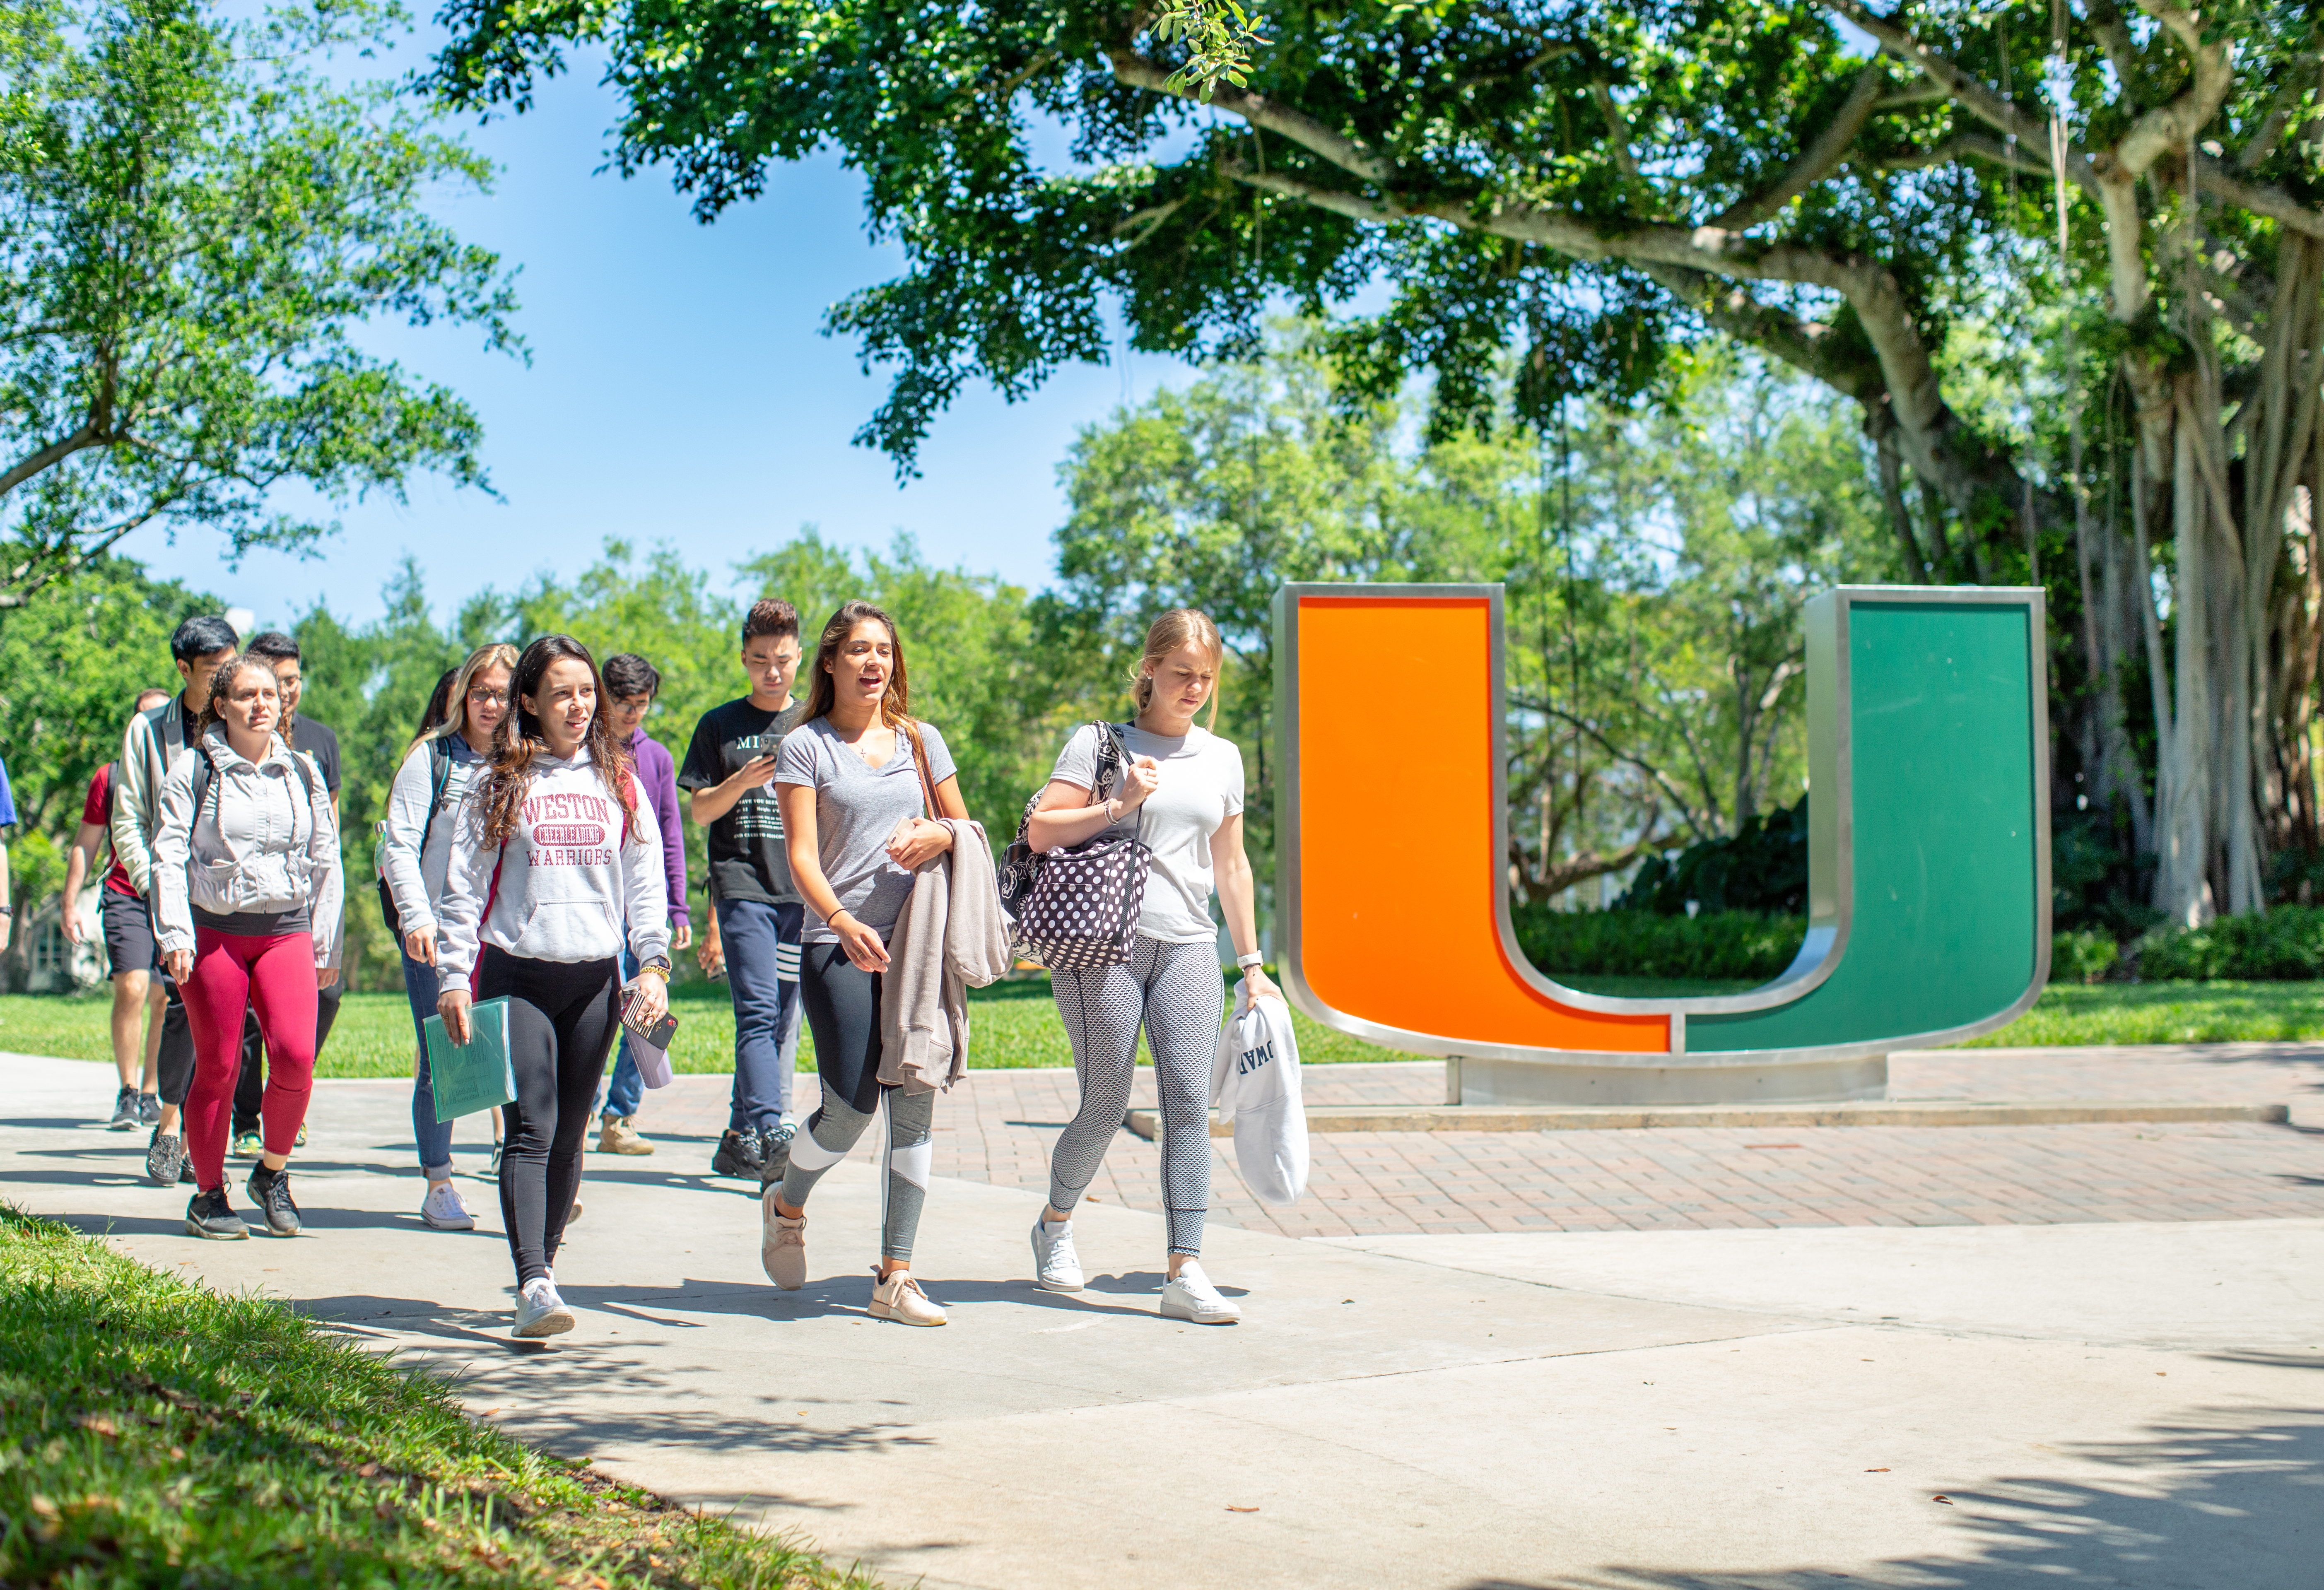 Students walking by the University of Miami U statue.